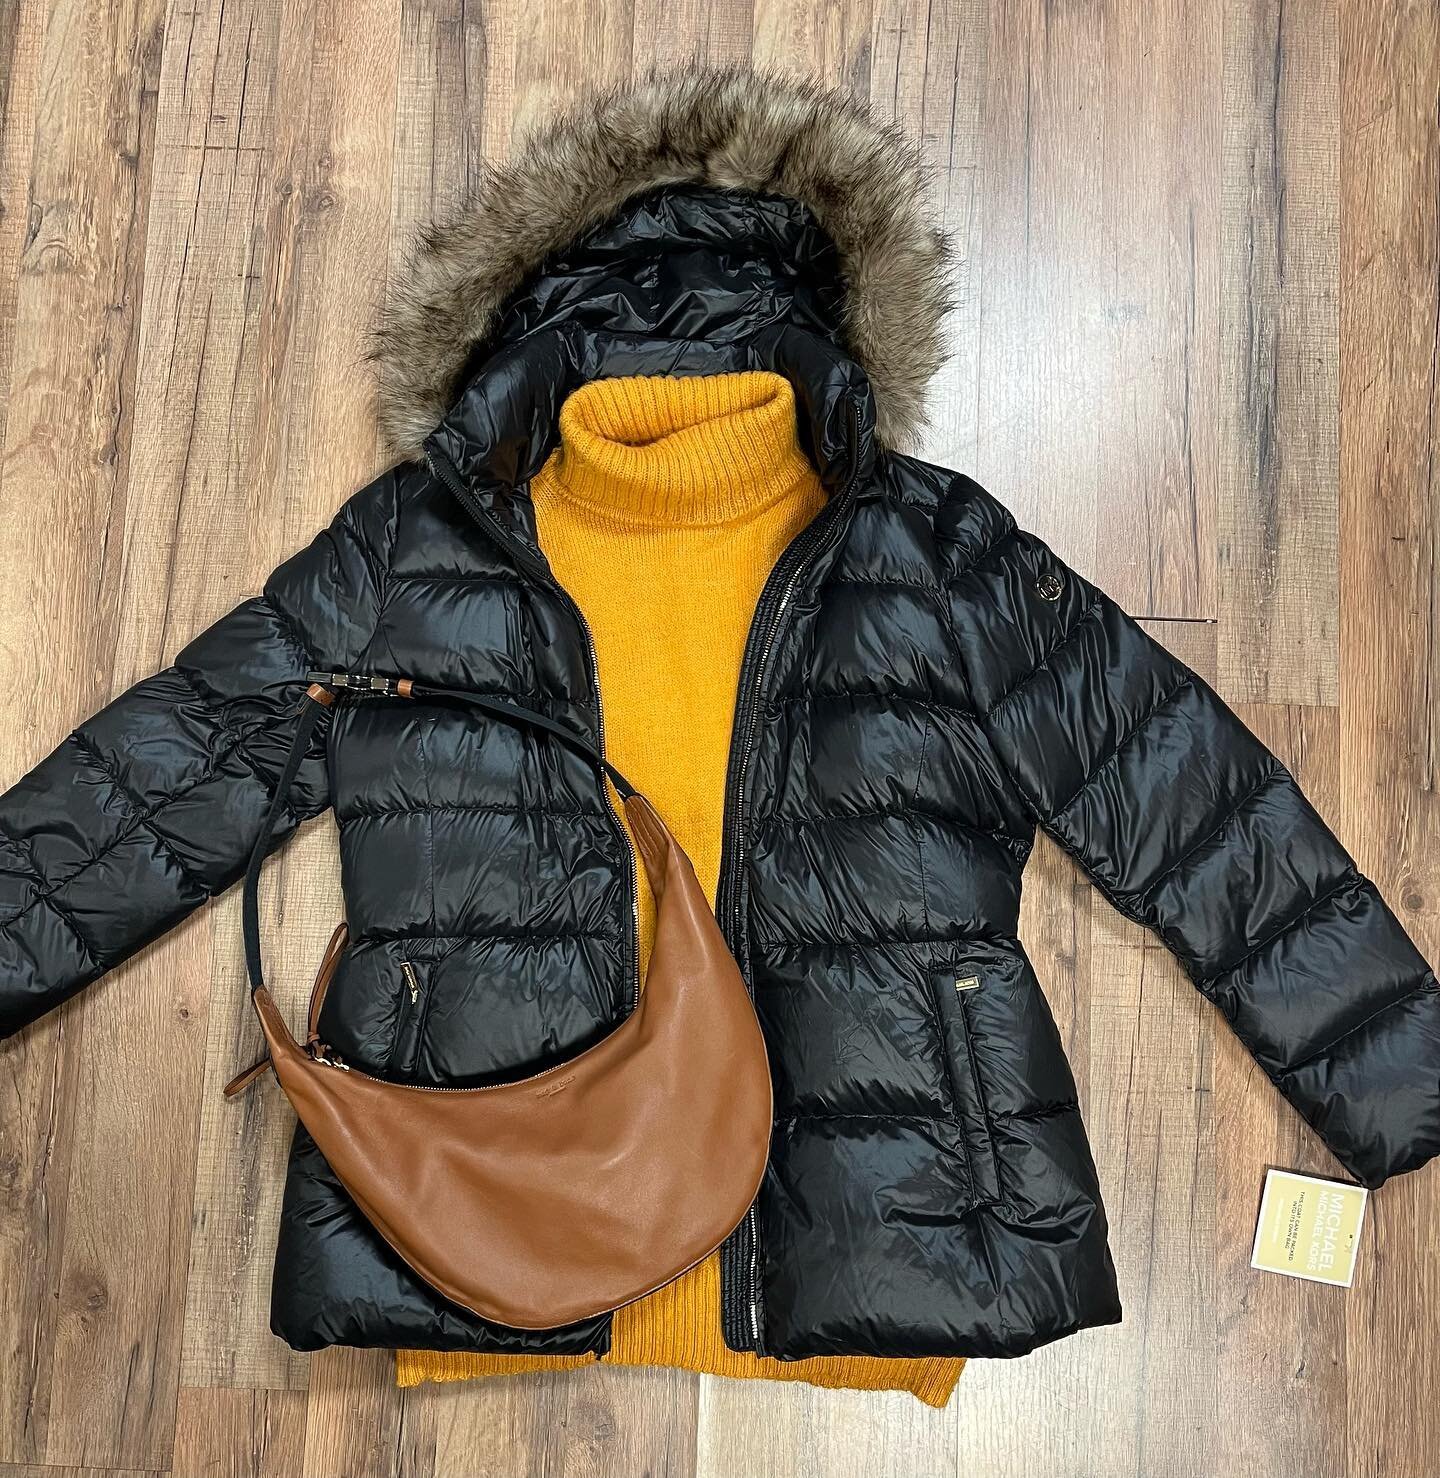 &hellip;&hellip; 🍁 NEW ARRIVALS 🍁 &hellip;&hellip; 
Michael Kors jacket in size large $66 👌 Rag and Bone crossbody pack $77 👌 Boutique wool sweater in size large $22. 
.
.
#uptownattic #designerconsignment #consignment #consignmentboutique #micha